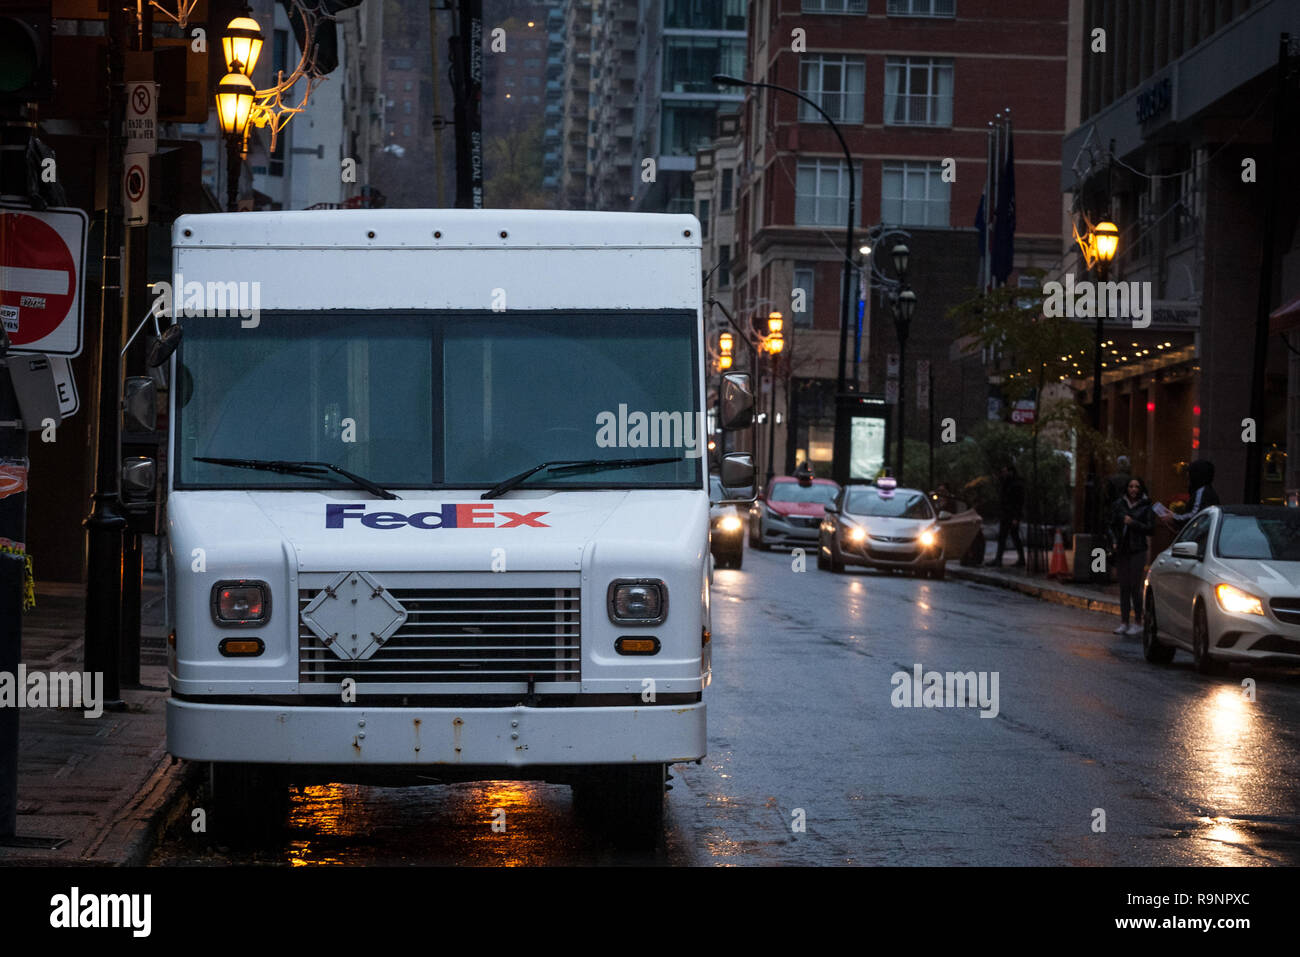 MONTREAL, CANADA - NOVEMBER 5, 2018: Fedex logo on one of their delivery trucks in a street of Montreal, Quebec. Fedex is an American courier speciali Stock Photo